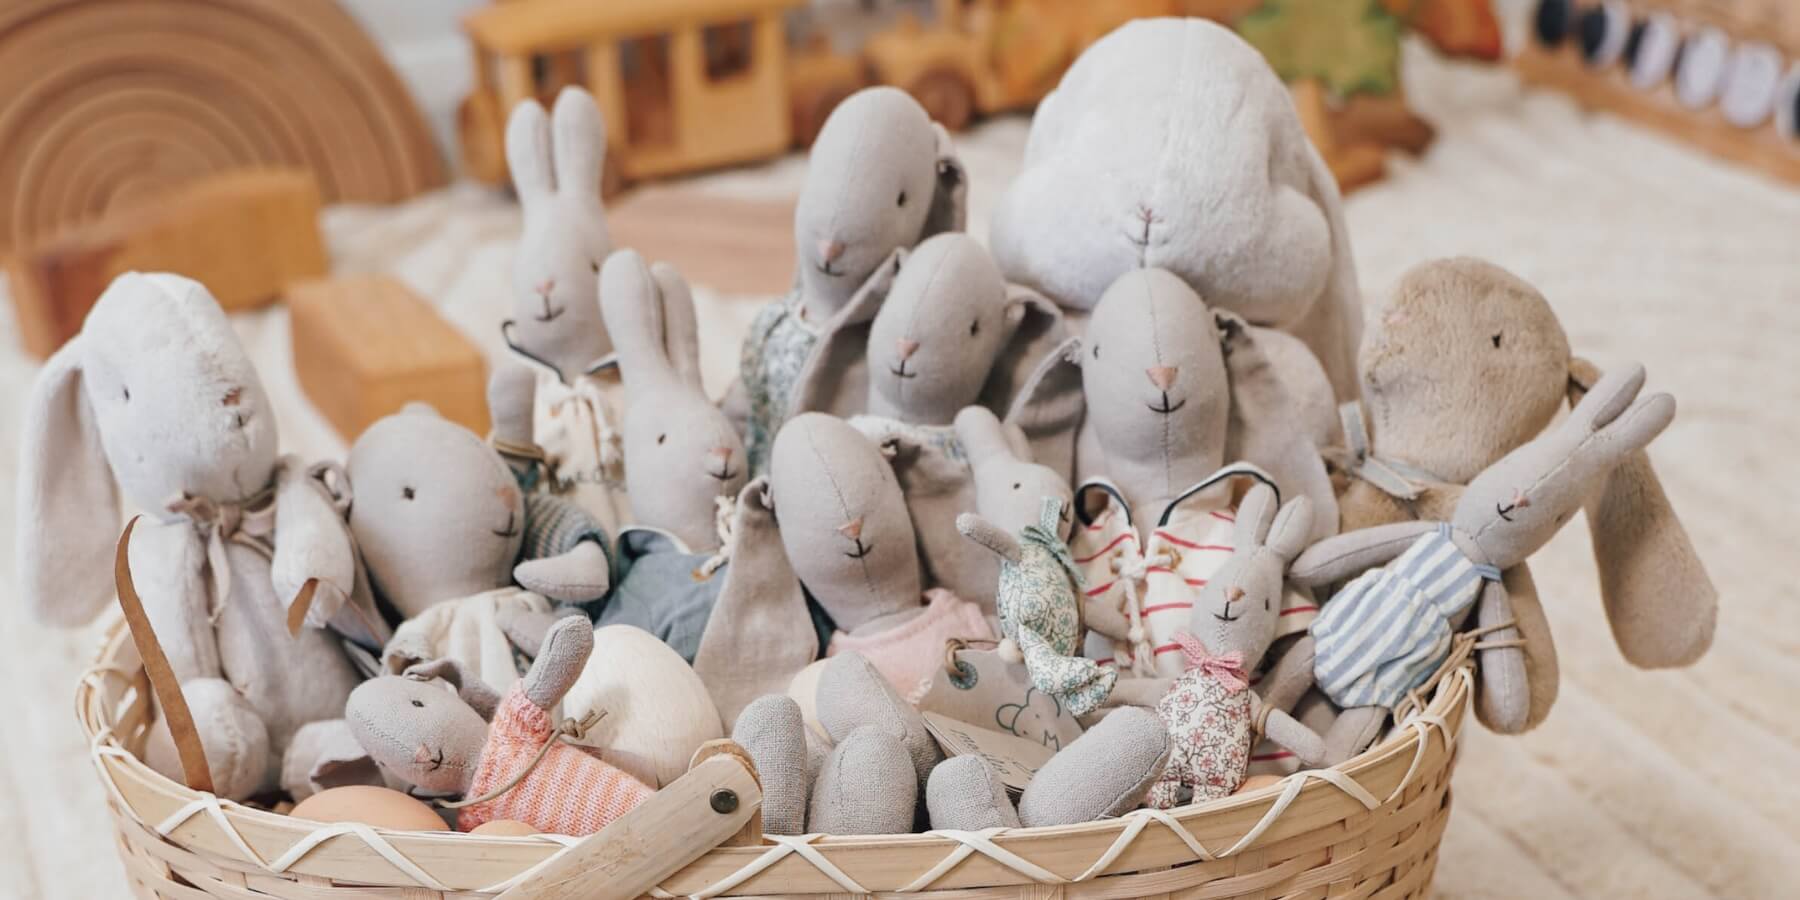 Maileg Rabbits and Bunnies. Nostalgic, natural soft toys and small world play figures for children.